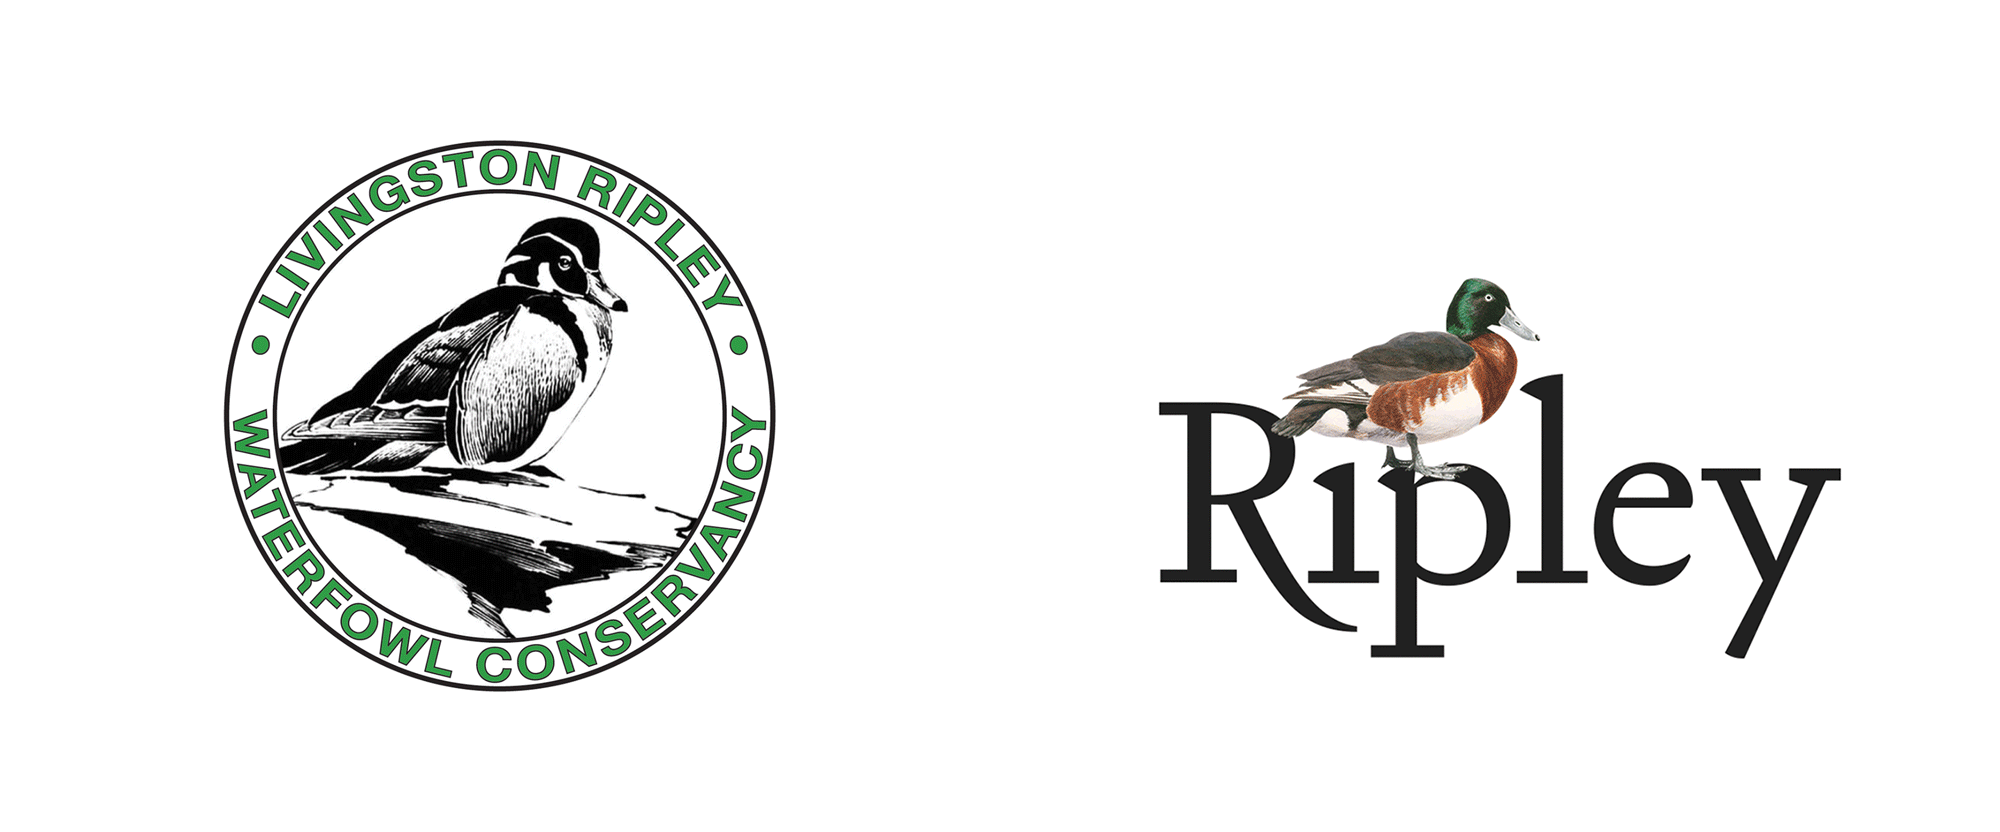 New Logo for Ripley Waterfowl Conservancy by Alexander Isley Inc.